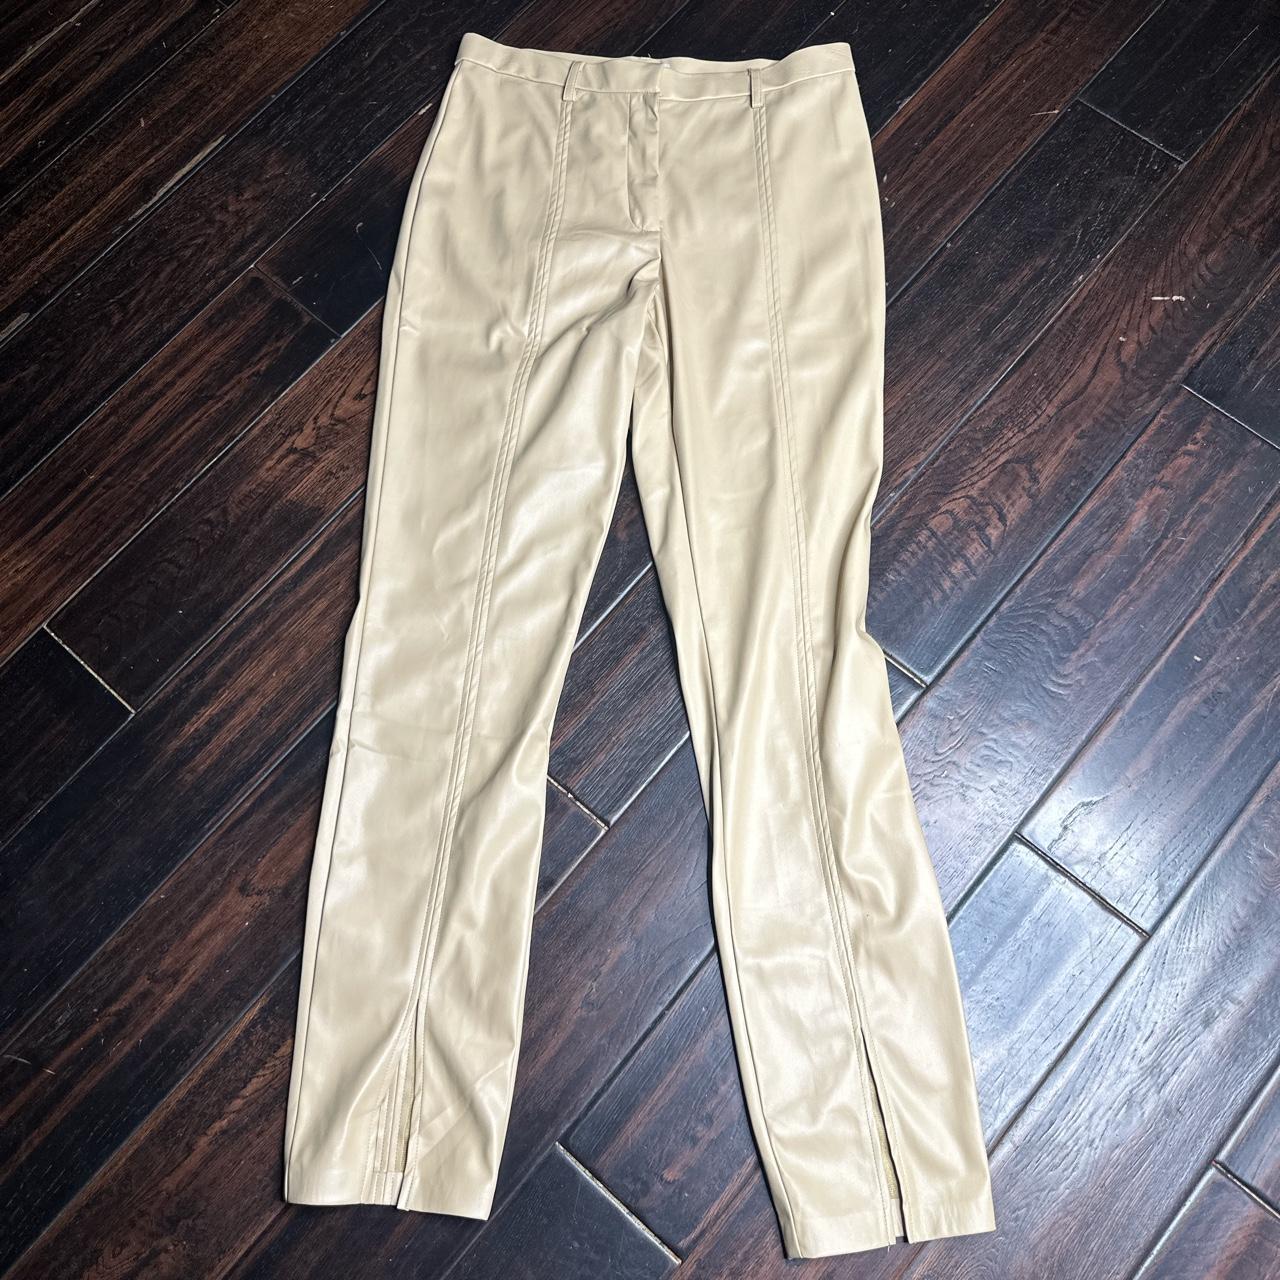 Faux leather pants with front slit at bottom. Very - Depop